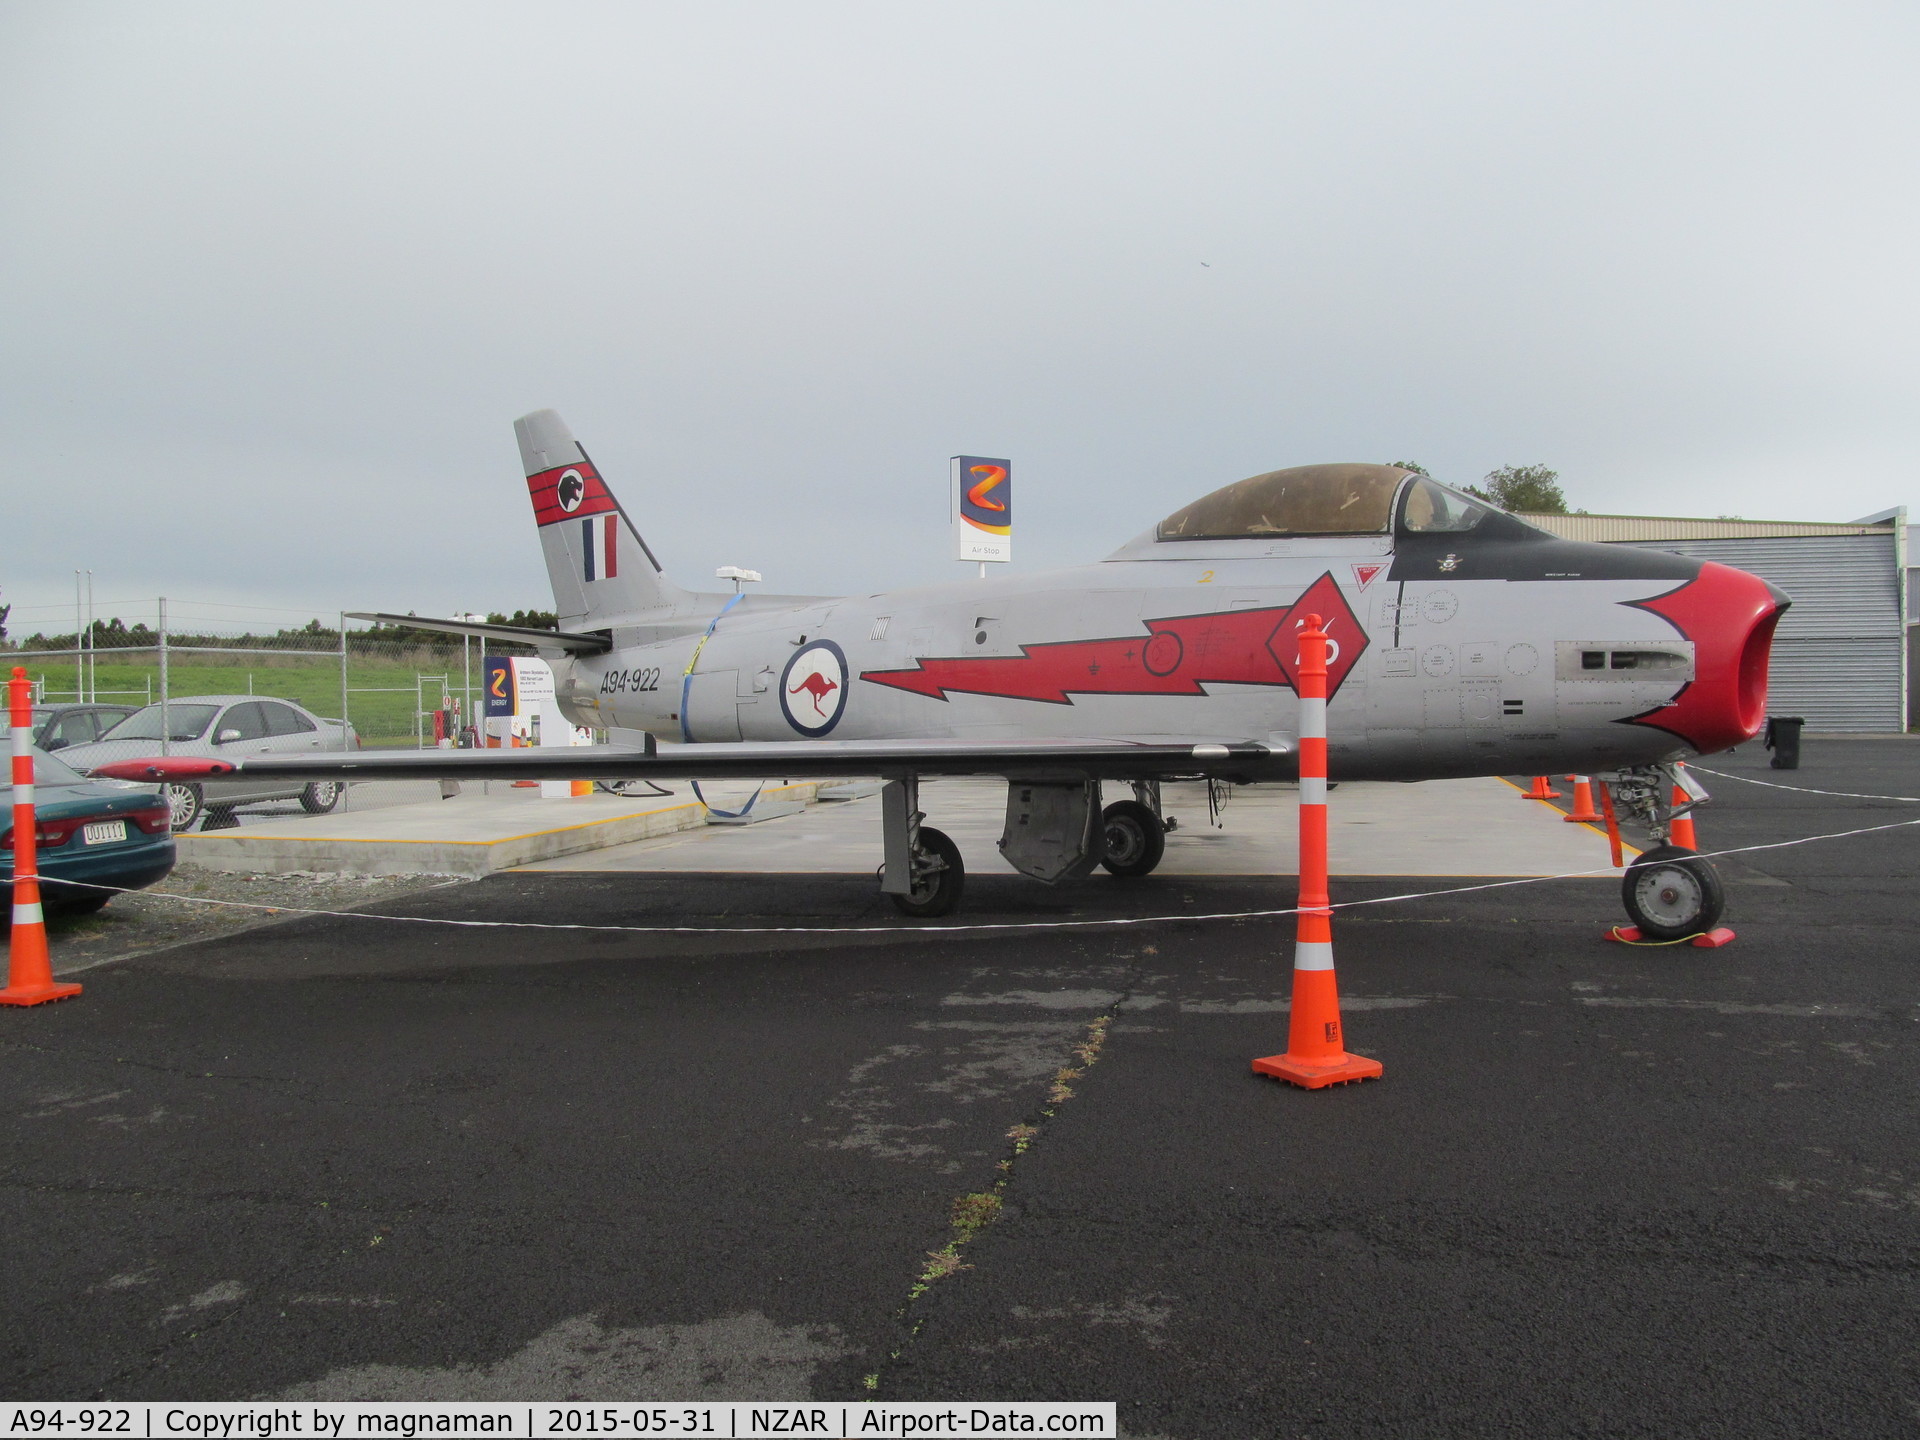 A94-922, 1955 Commonwealth CA-27 Sabre Mk.31 C/N CA27-22, Out of hangar for first time in years during open day